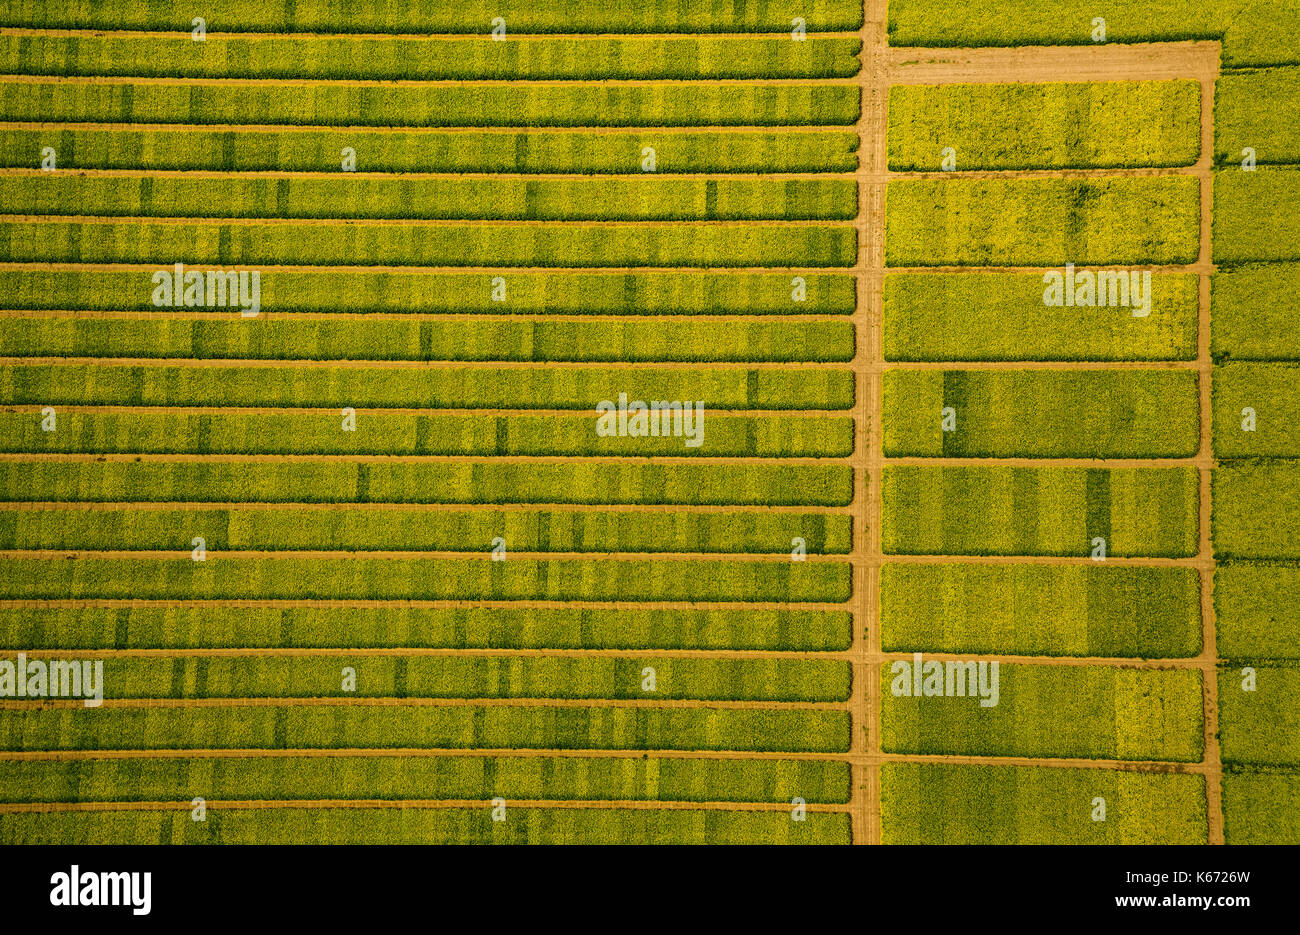 Canola field with divisions for Testsaat, Landwirtschft, agricultural cropland, agricultural test site, Saatoptimierung, yellow rapeseed field in gree Stock Photo